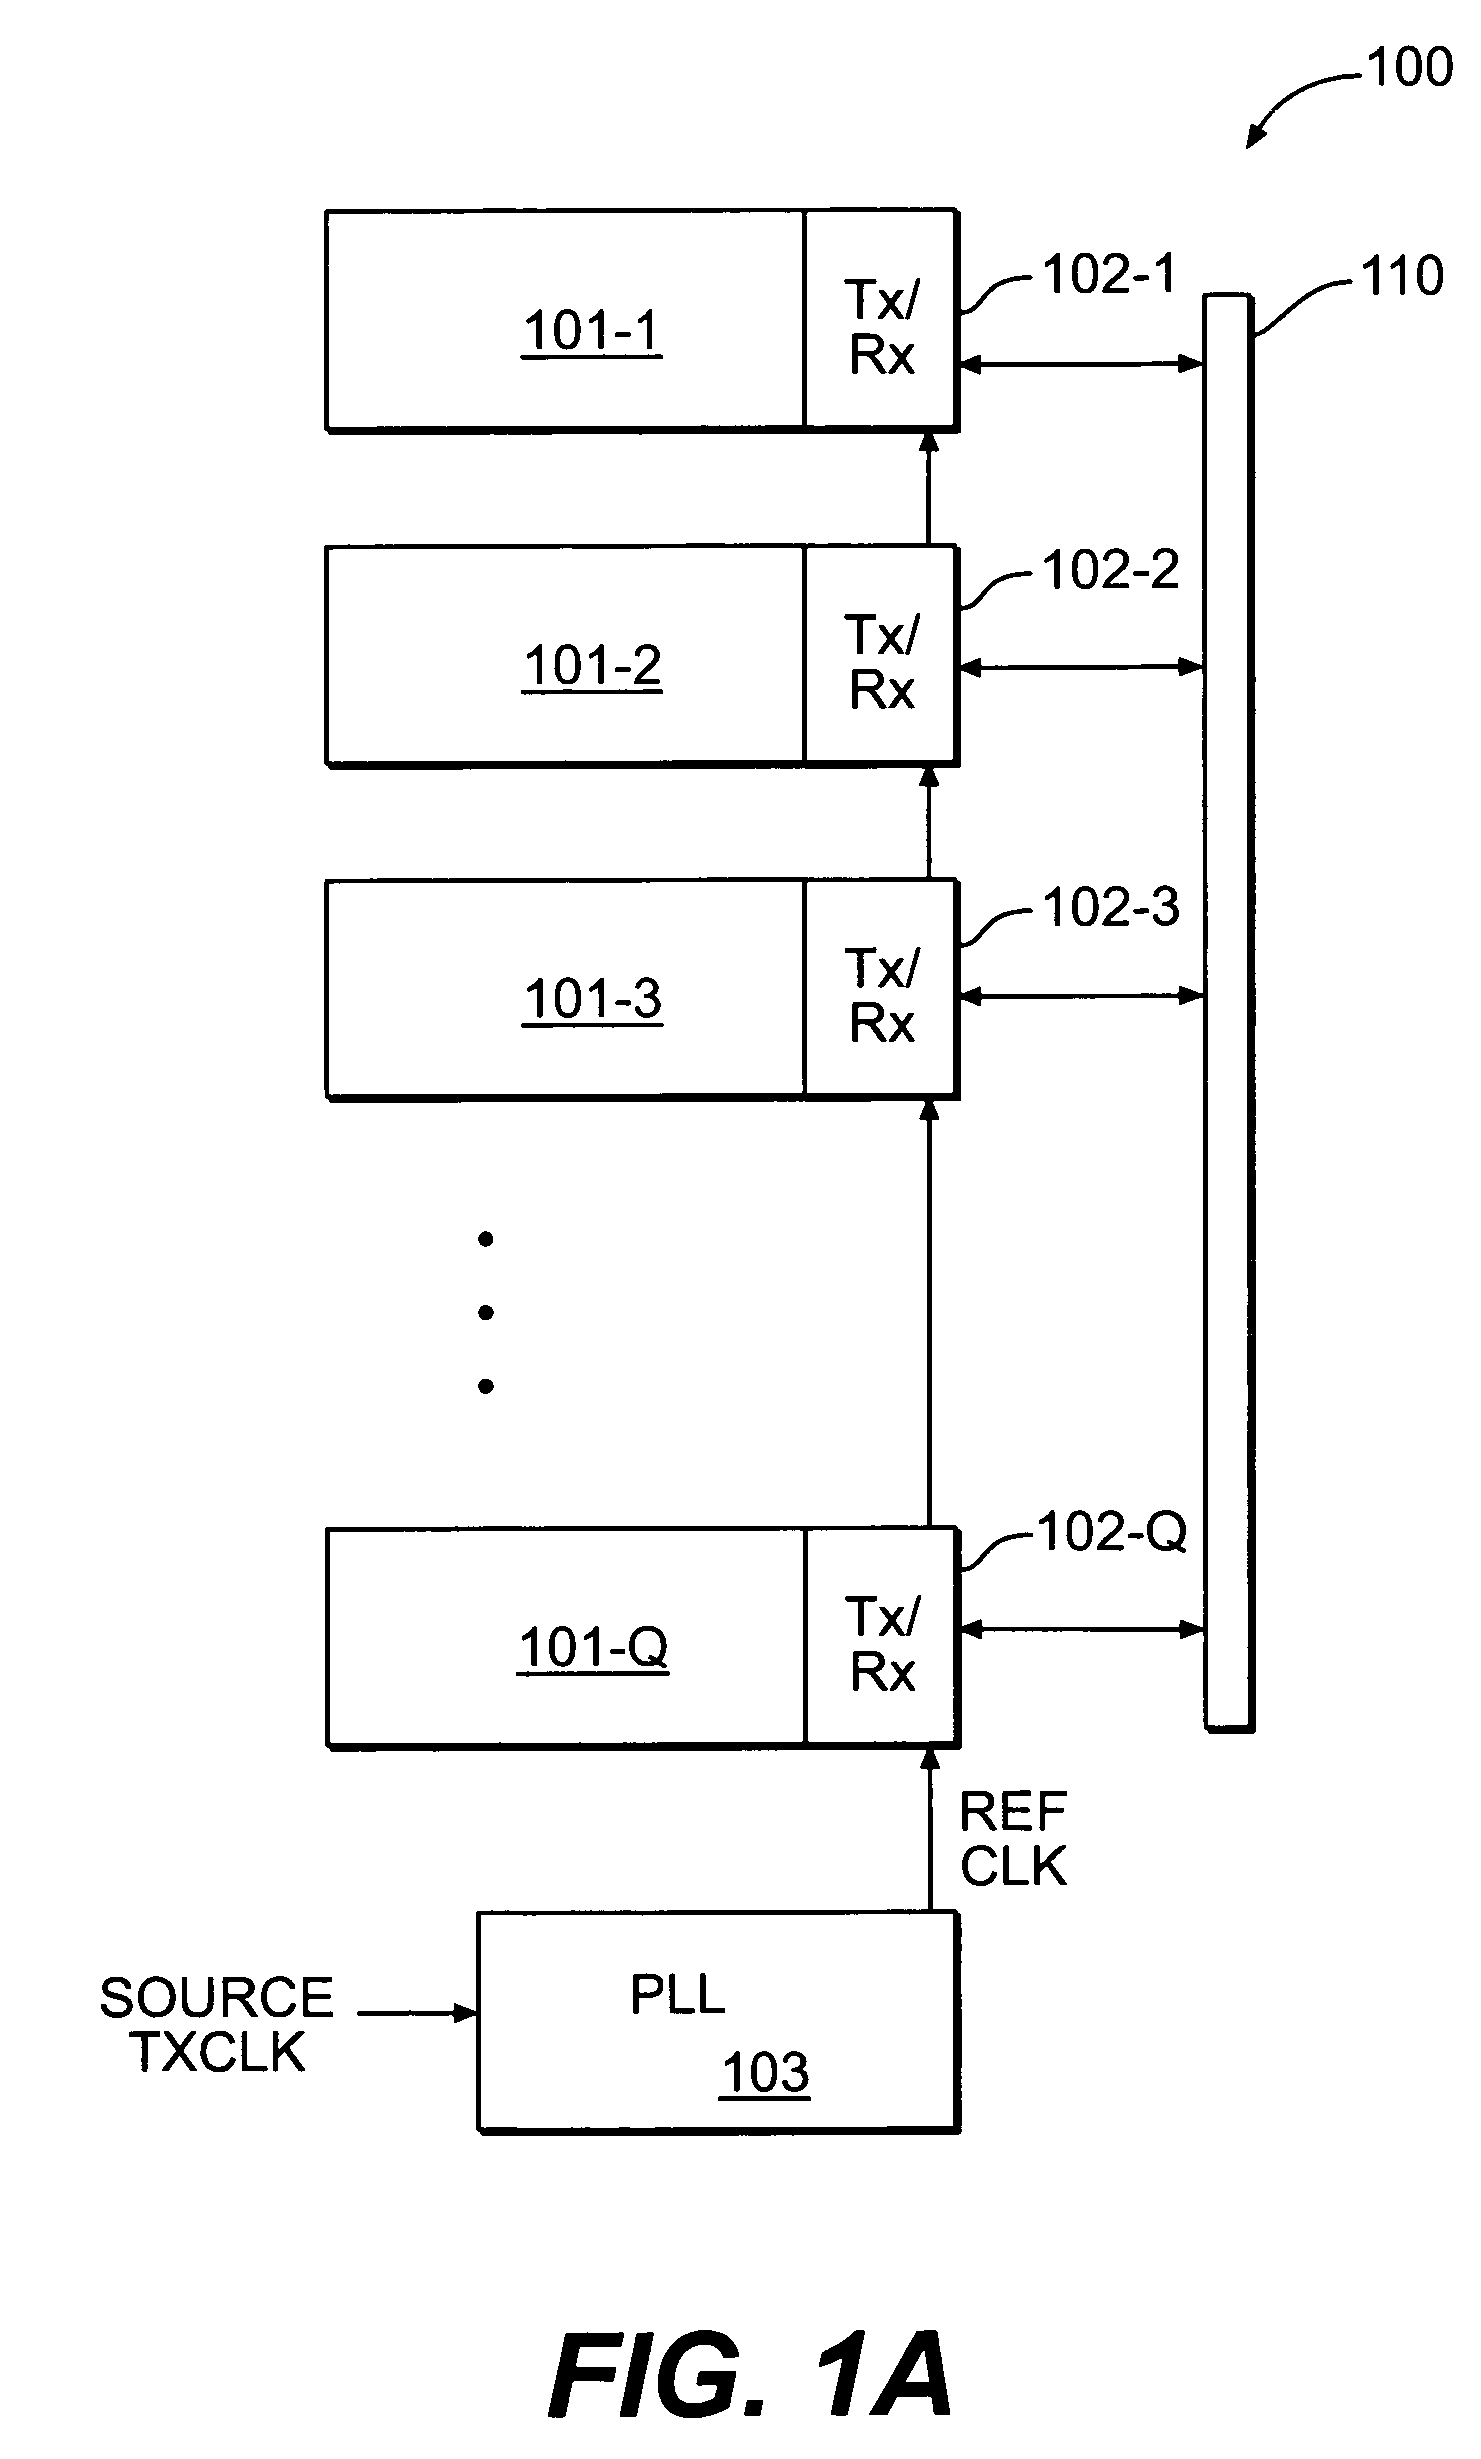 Channel power balancing in a multi-channel transceiver system